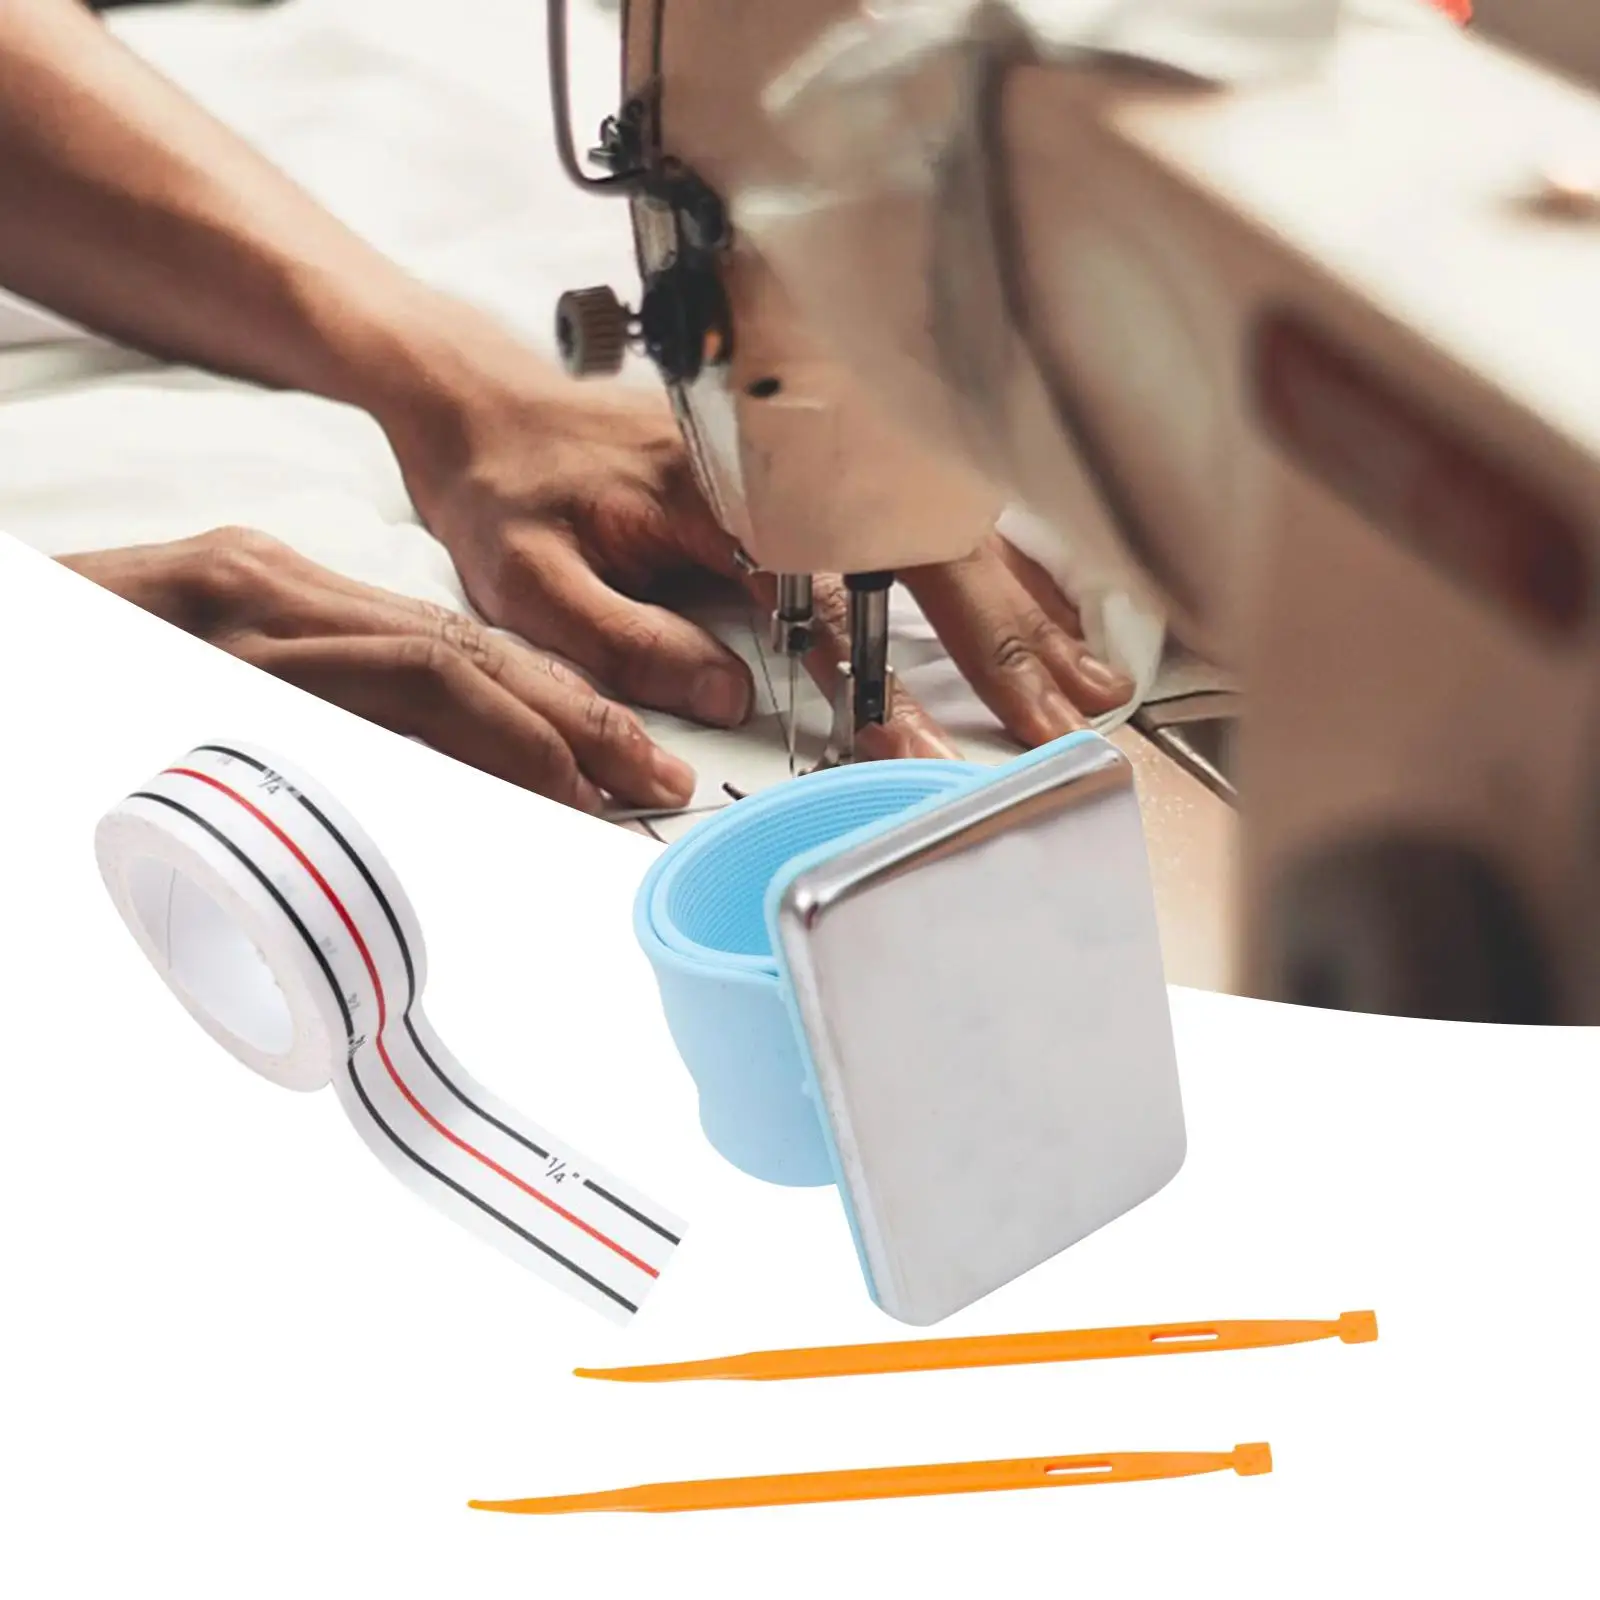 Magnetic Wrist Sewing Pincushion Magnetic Wristband Needle Pad Portable Professional for Embroidery Barber Salon Sewing Quilting